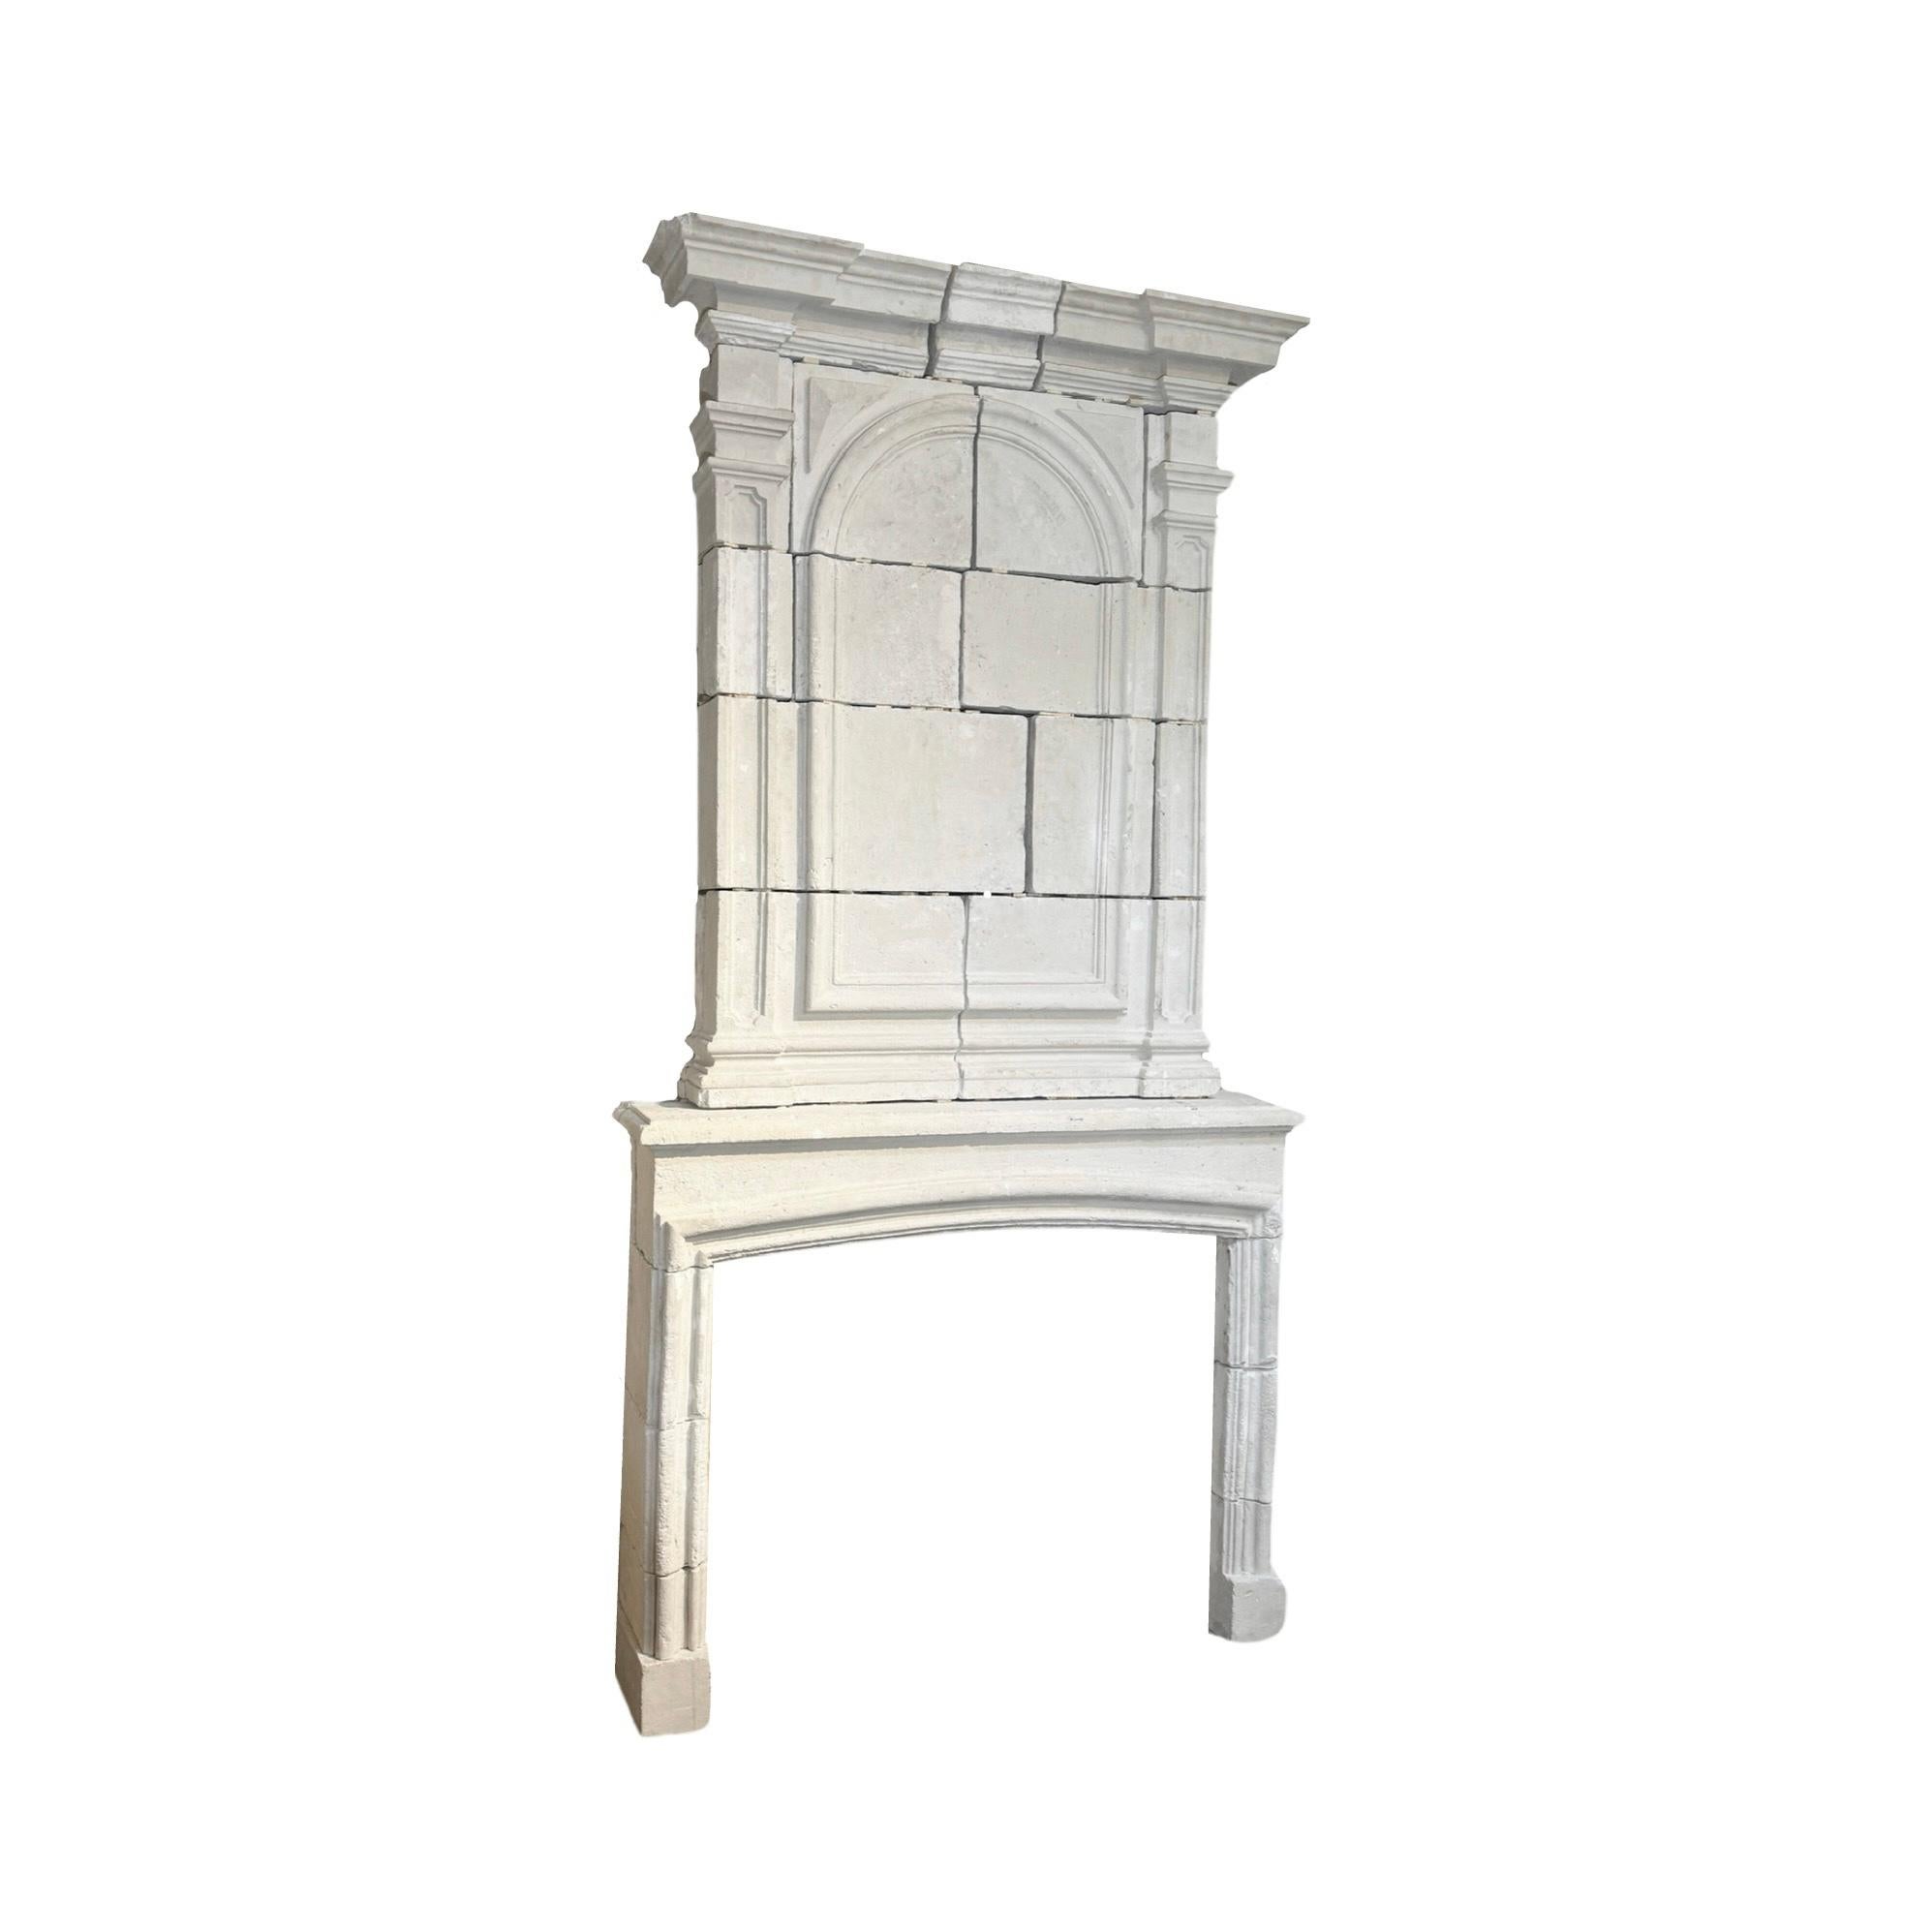 This 1850s French limestone fireplace mantel brings a touch of history and elegance to any home. Crafted in a Louis XIII style, the antique mantel adds a unique touch to your fireplace while bringing the durability and beauty of French limestone.